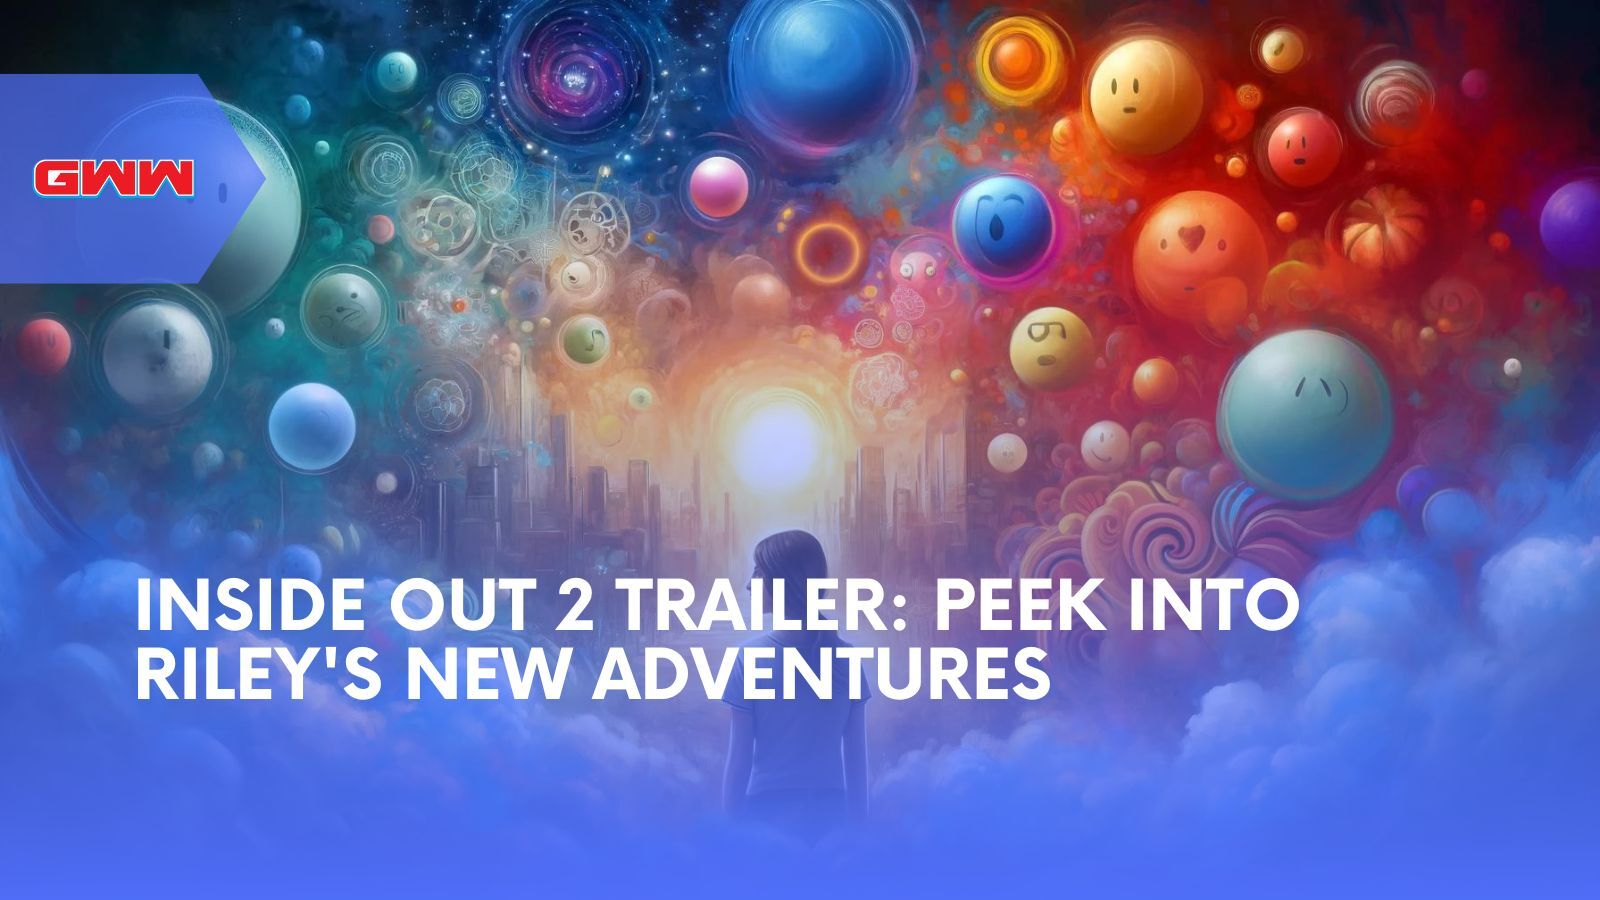 Inside Out 2 Trailer: Peek Into Riley's New Adventures